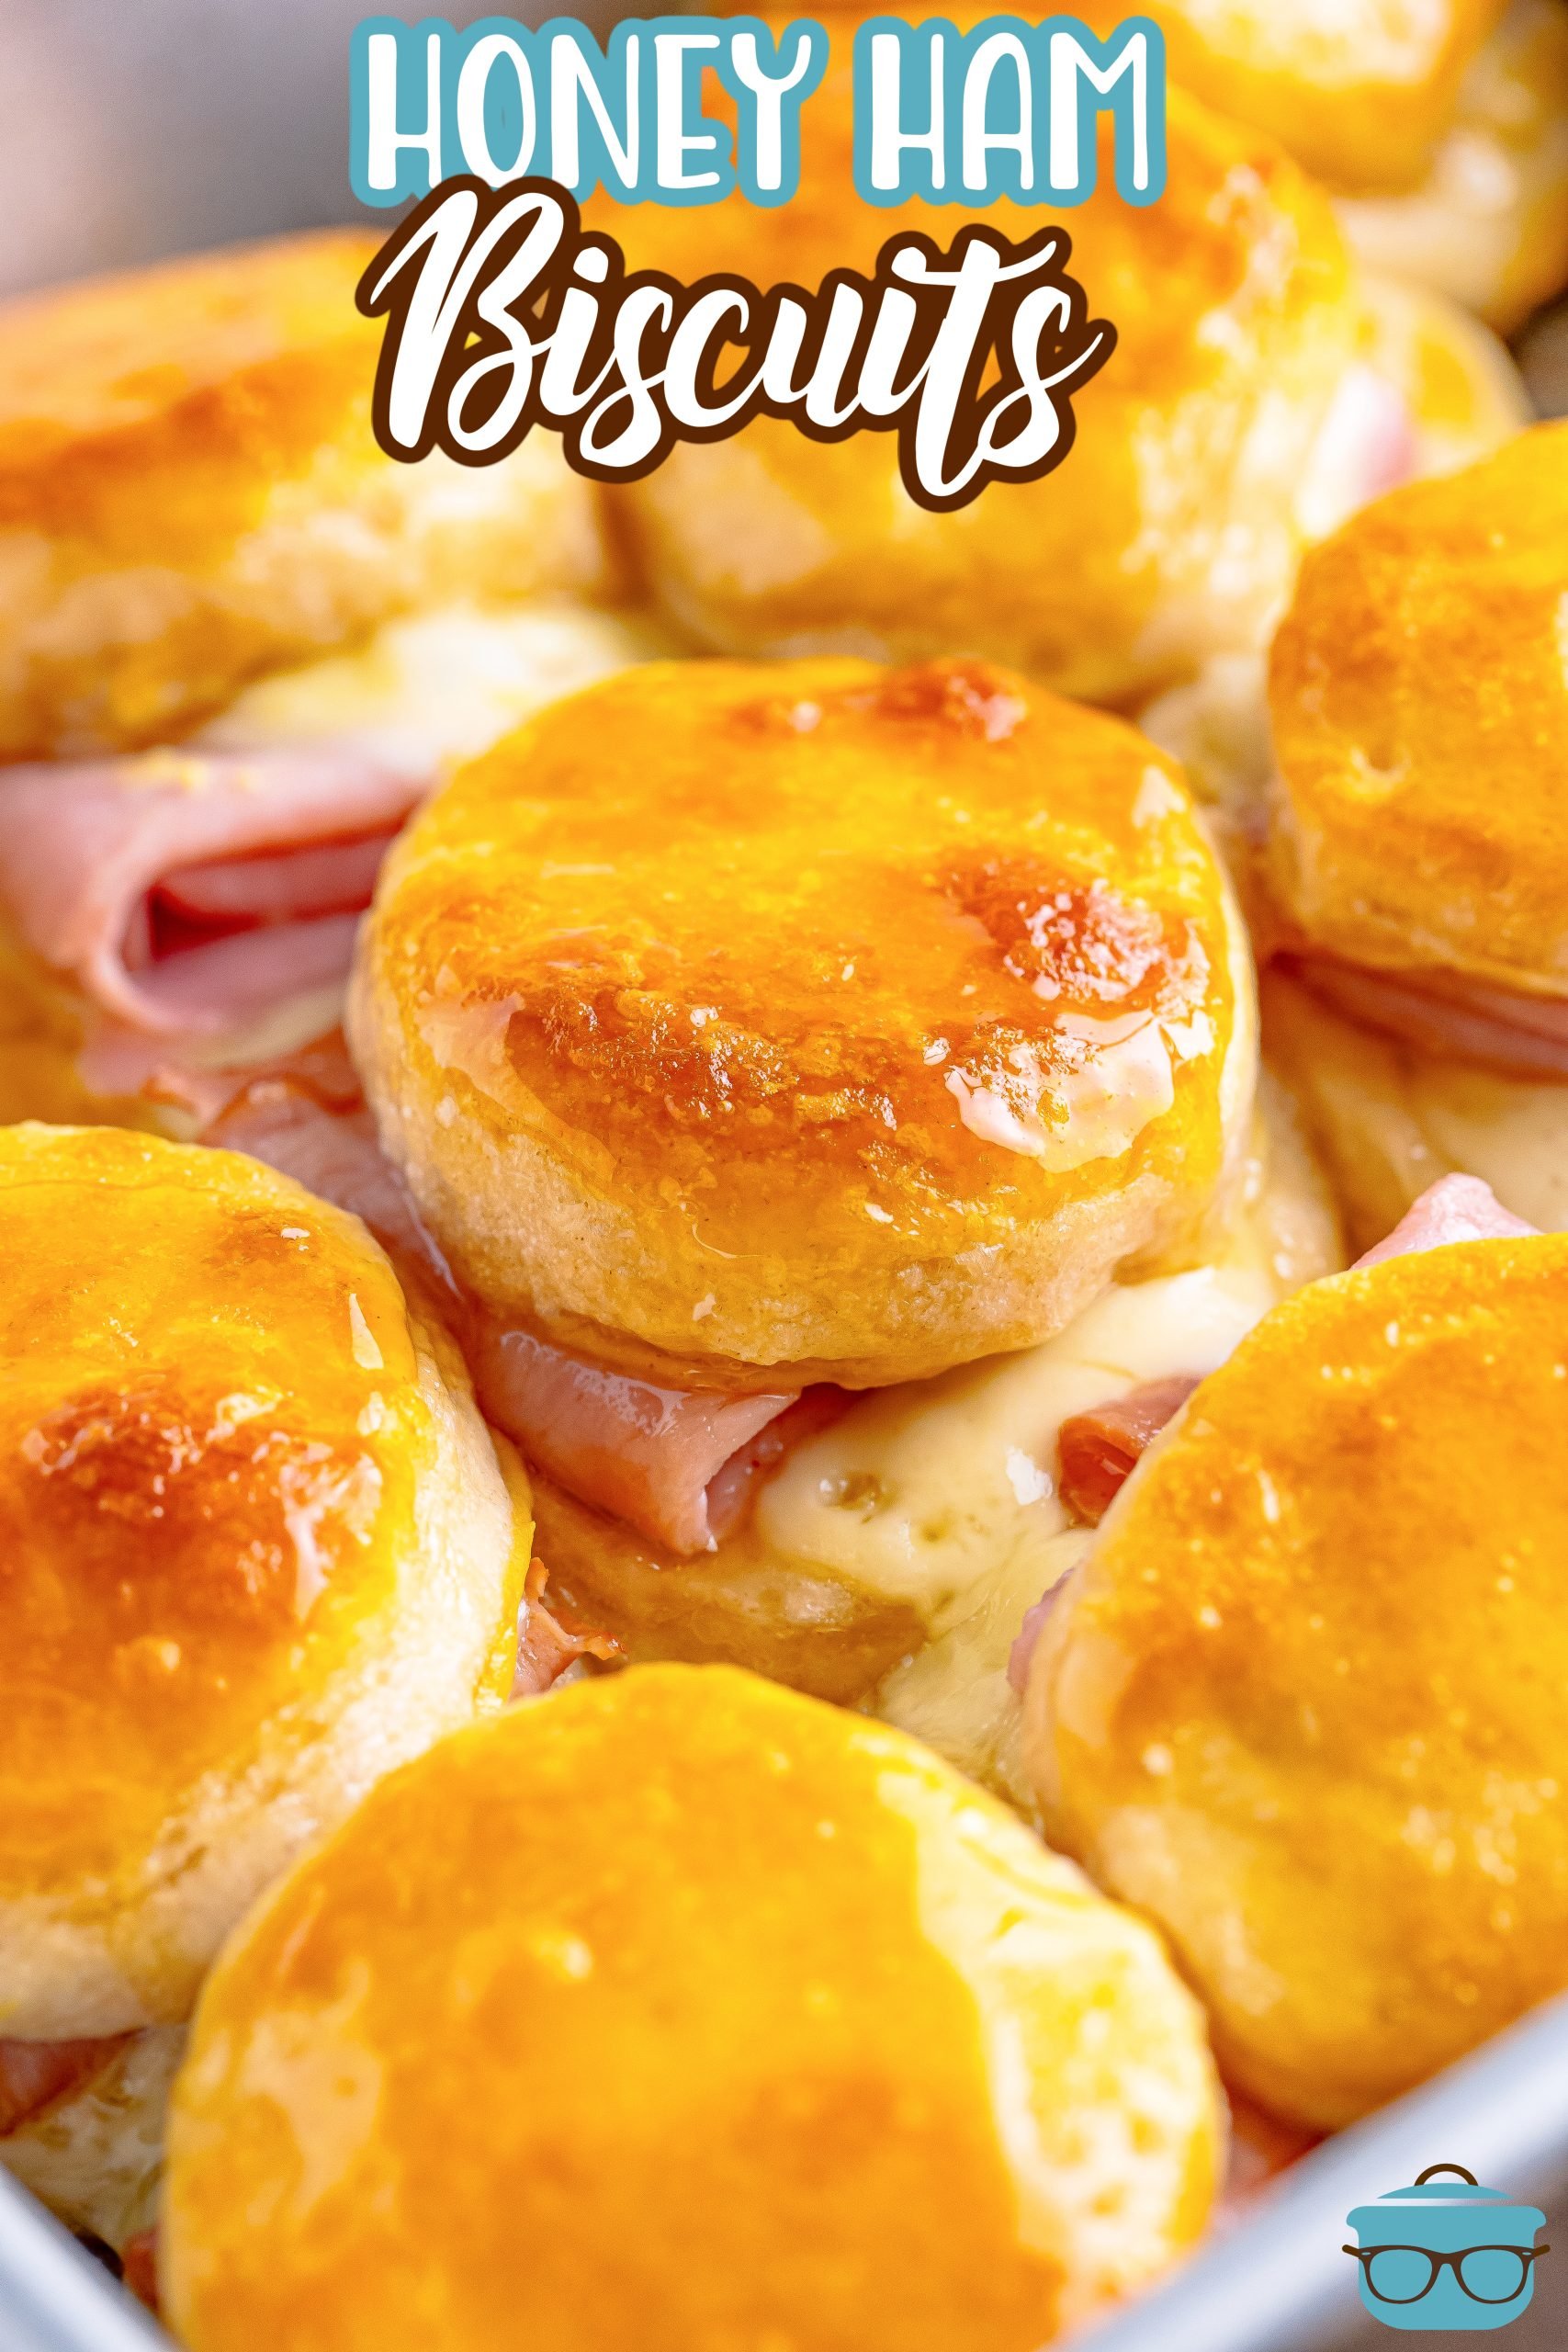 A bunch of Honey Ham Biscuits on a platter or baking tray.